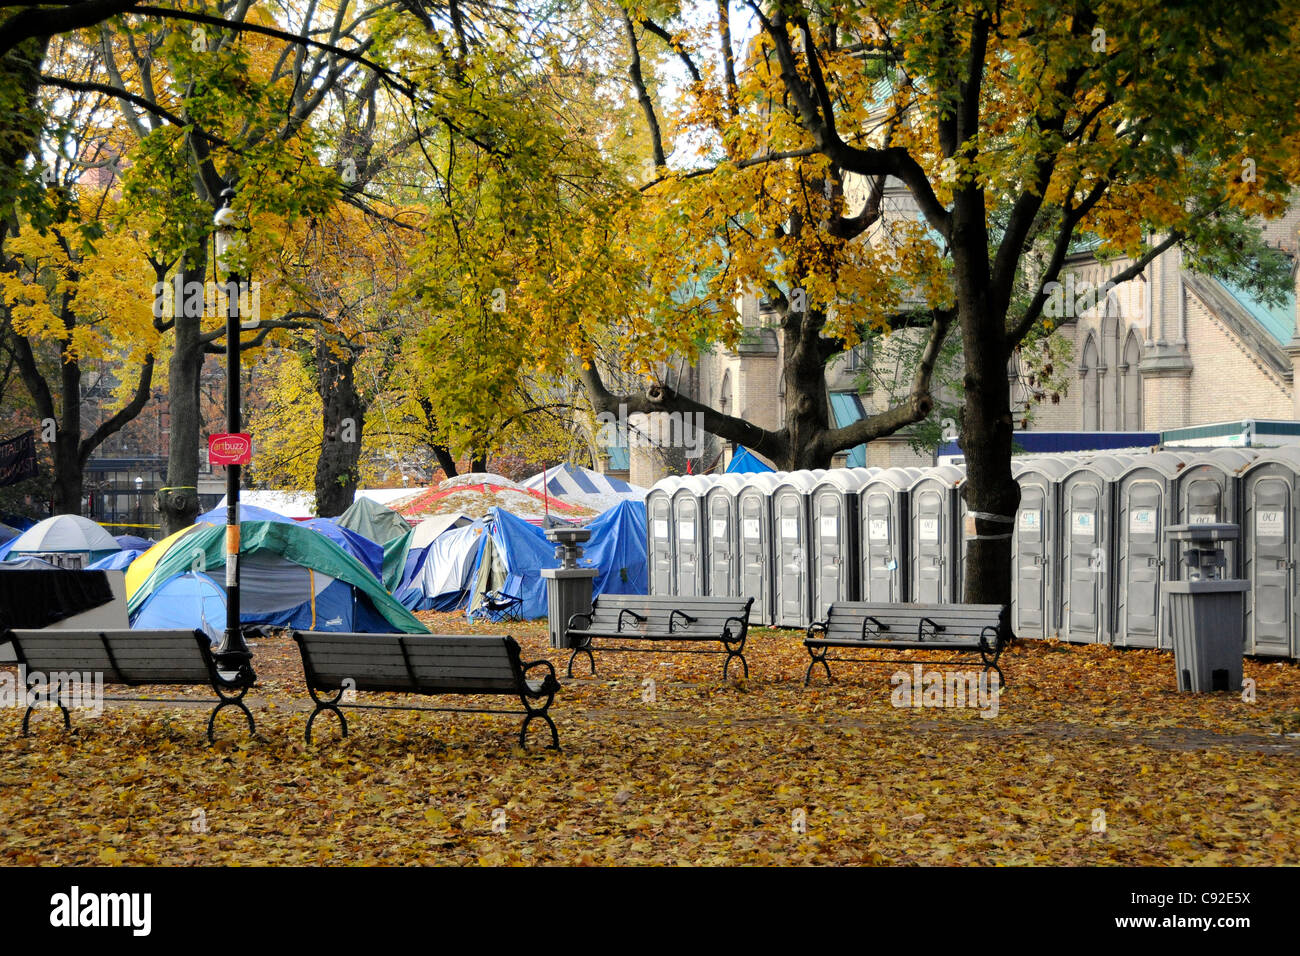 a-city-within-a-park-the-occupy-toronto-movement-continues-to-occupy-C92E5X.jpg